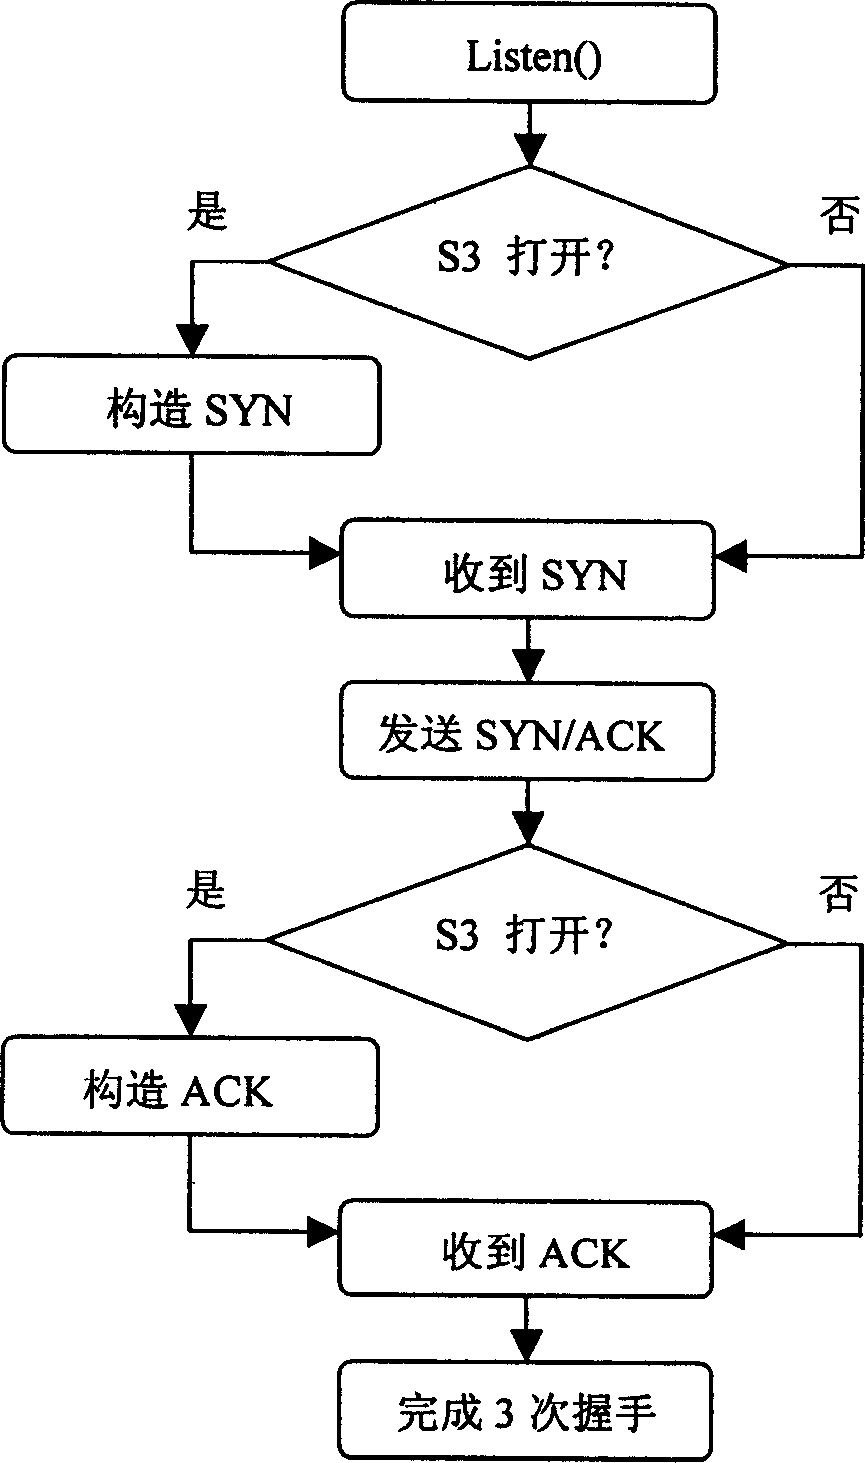 A method for primary and standby machine to take turns on TCP connection